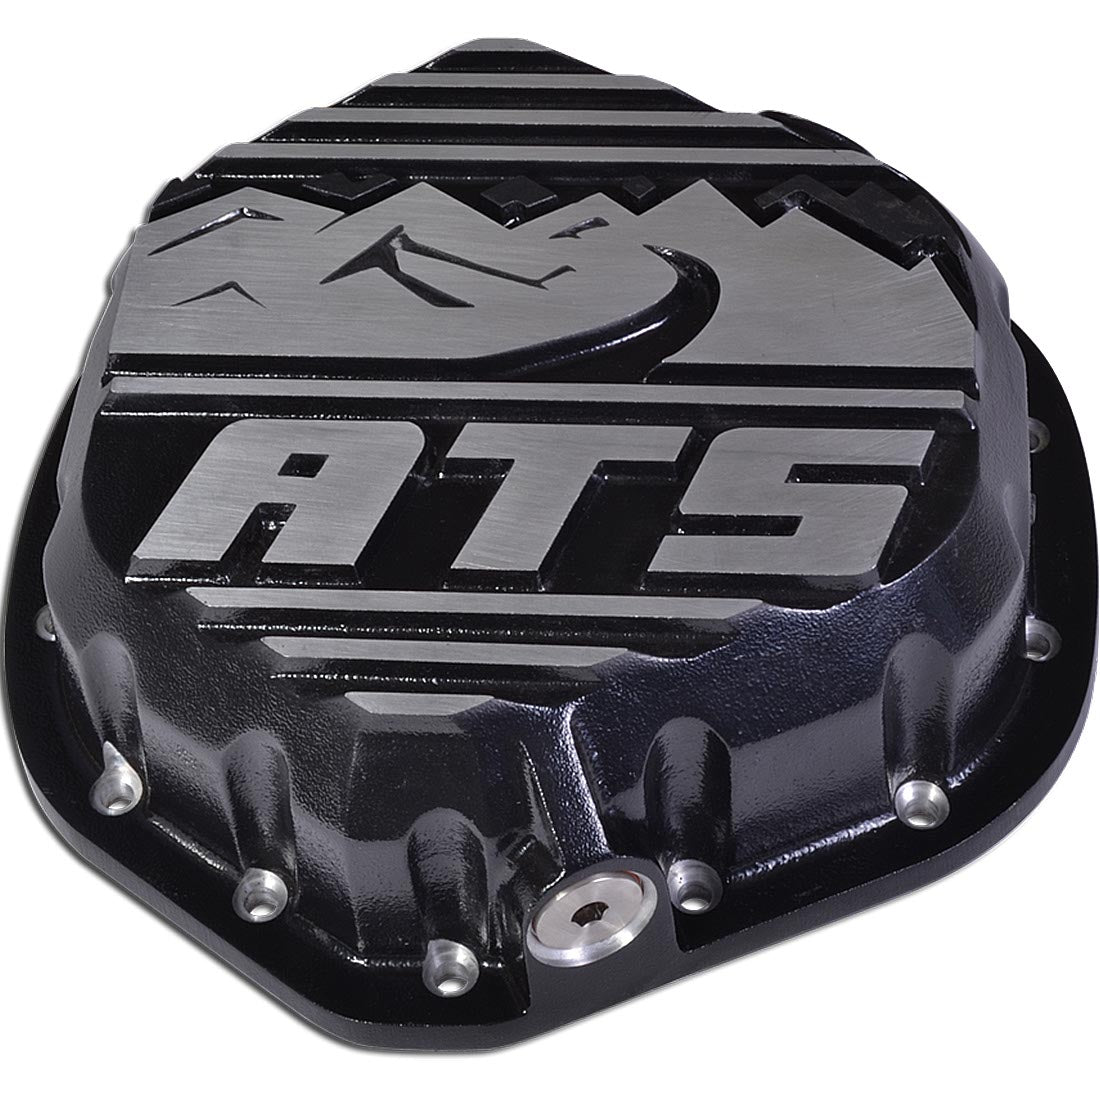 ATS Diesel Performance 402-900-2272-FSMF Protector AAM 11.5 Inch Differential Cover Assembly 2003-2019 Dodge RAM 2500/3500